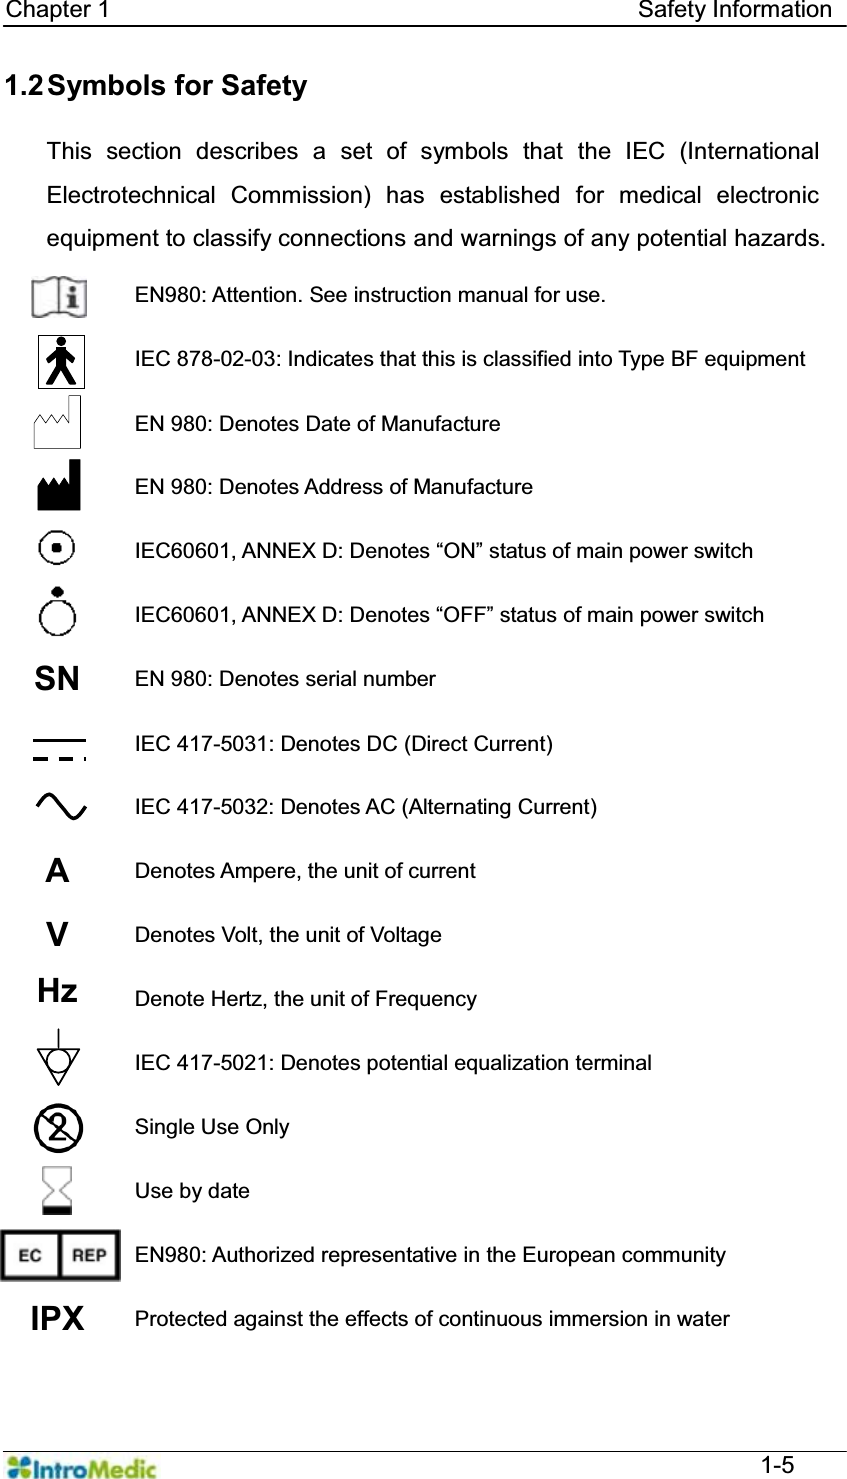   Chapter 1                                            Safety Information  1-5 1.2 Symbols for Safety  This section describes a set of symbols that the IEC (International Electrotechnical Commission) has established for medical electronic equipment to classify connections and warnings of any potential hazards. EN980: Attention. See instruction manual for use.  IEC 878-02-03: Indicates that this is classified into Type BF equipment  EN 980: Denotes Date of Manufacture  EN 980: Denotes Address of Manufacture  ,(&amp;$11(;&apos;&apos;HQRWHV³21´VWDWXVRIPDLQSRZHUVZLWFK  ,(&amp;$11(;&apos;&apos;HQRWHV³2))´VWDWXVRIPDLQSRZHUVZLWFK SN  EN 980: Denotes serial number  IEC 417-5031: Denotes DC (Direct Current)  IEC 417-5032: Denotes AC (Alternating Current) A  Denotes Ampere, the unit of current V  Denotes Volt, the unit of Voltage Hz  Denote Hertz, the unit of Frequency  IEC 417-5021: Denotes potential equalization terminal  Single Use Only  Use by date  EN980: Authorized representative in the European community IPX  Protected against the effects of continuous immersion in water 